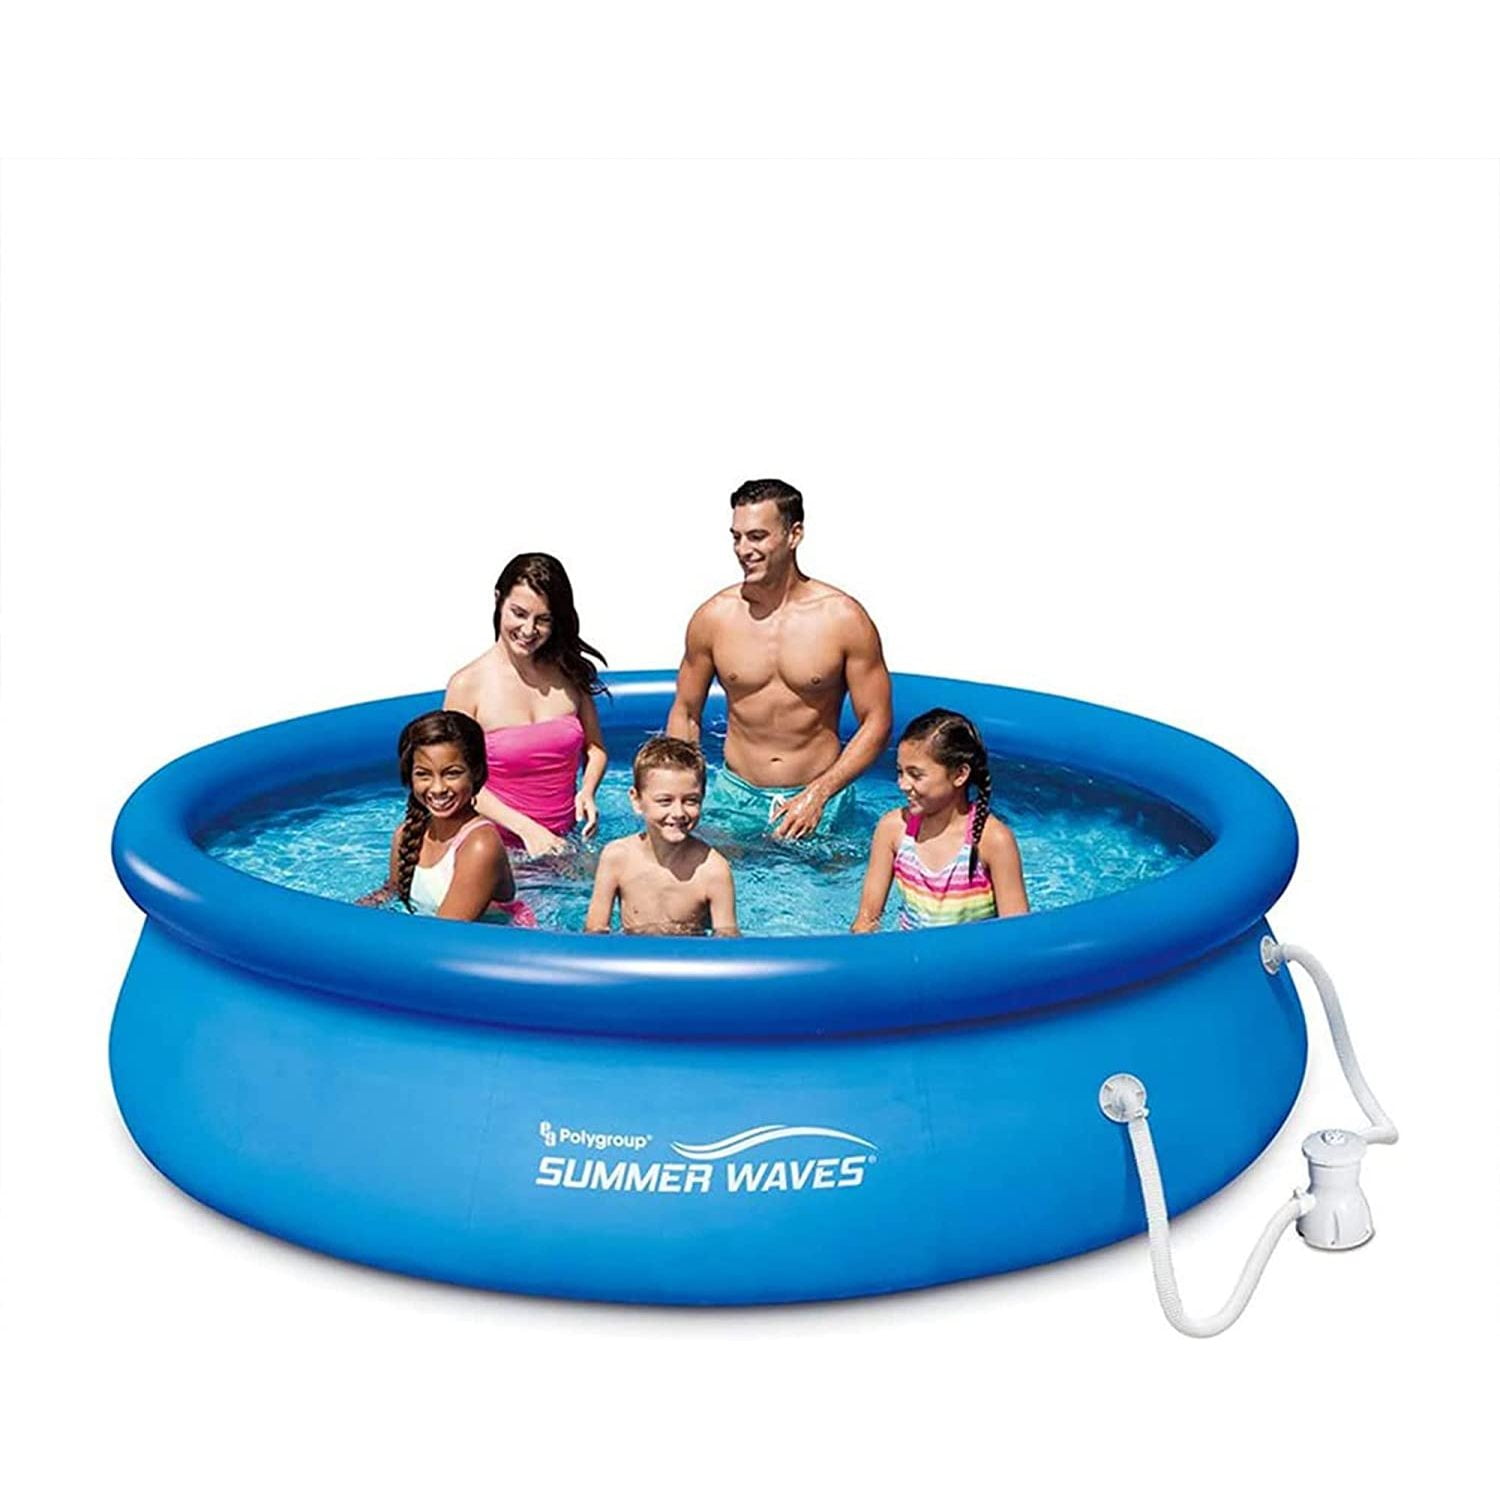 Pump Ring System, Filter Waves 2.5ft with Ground Blue Outdoor x Inflatable Summer Swimming P1001030A Pool 10ft Set Quick RX300 Outdoor Above GFCI